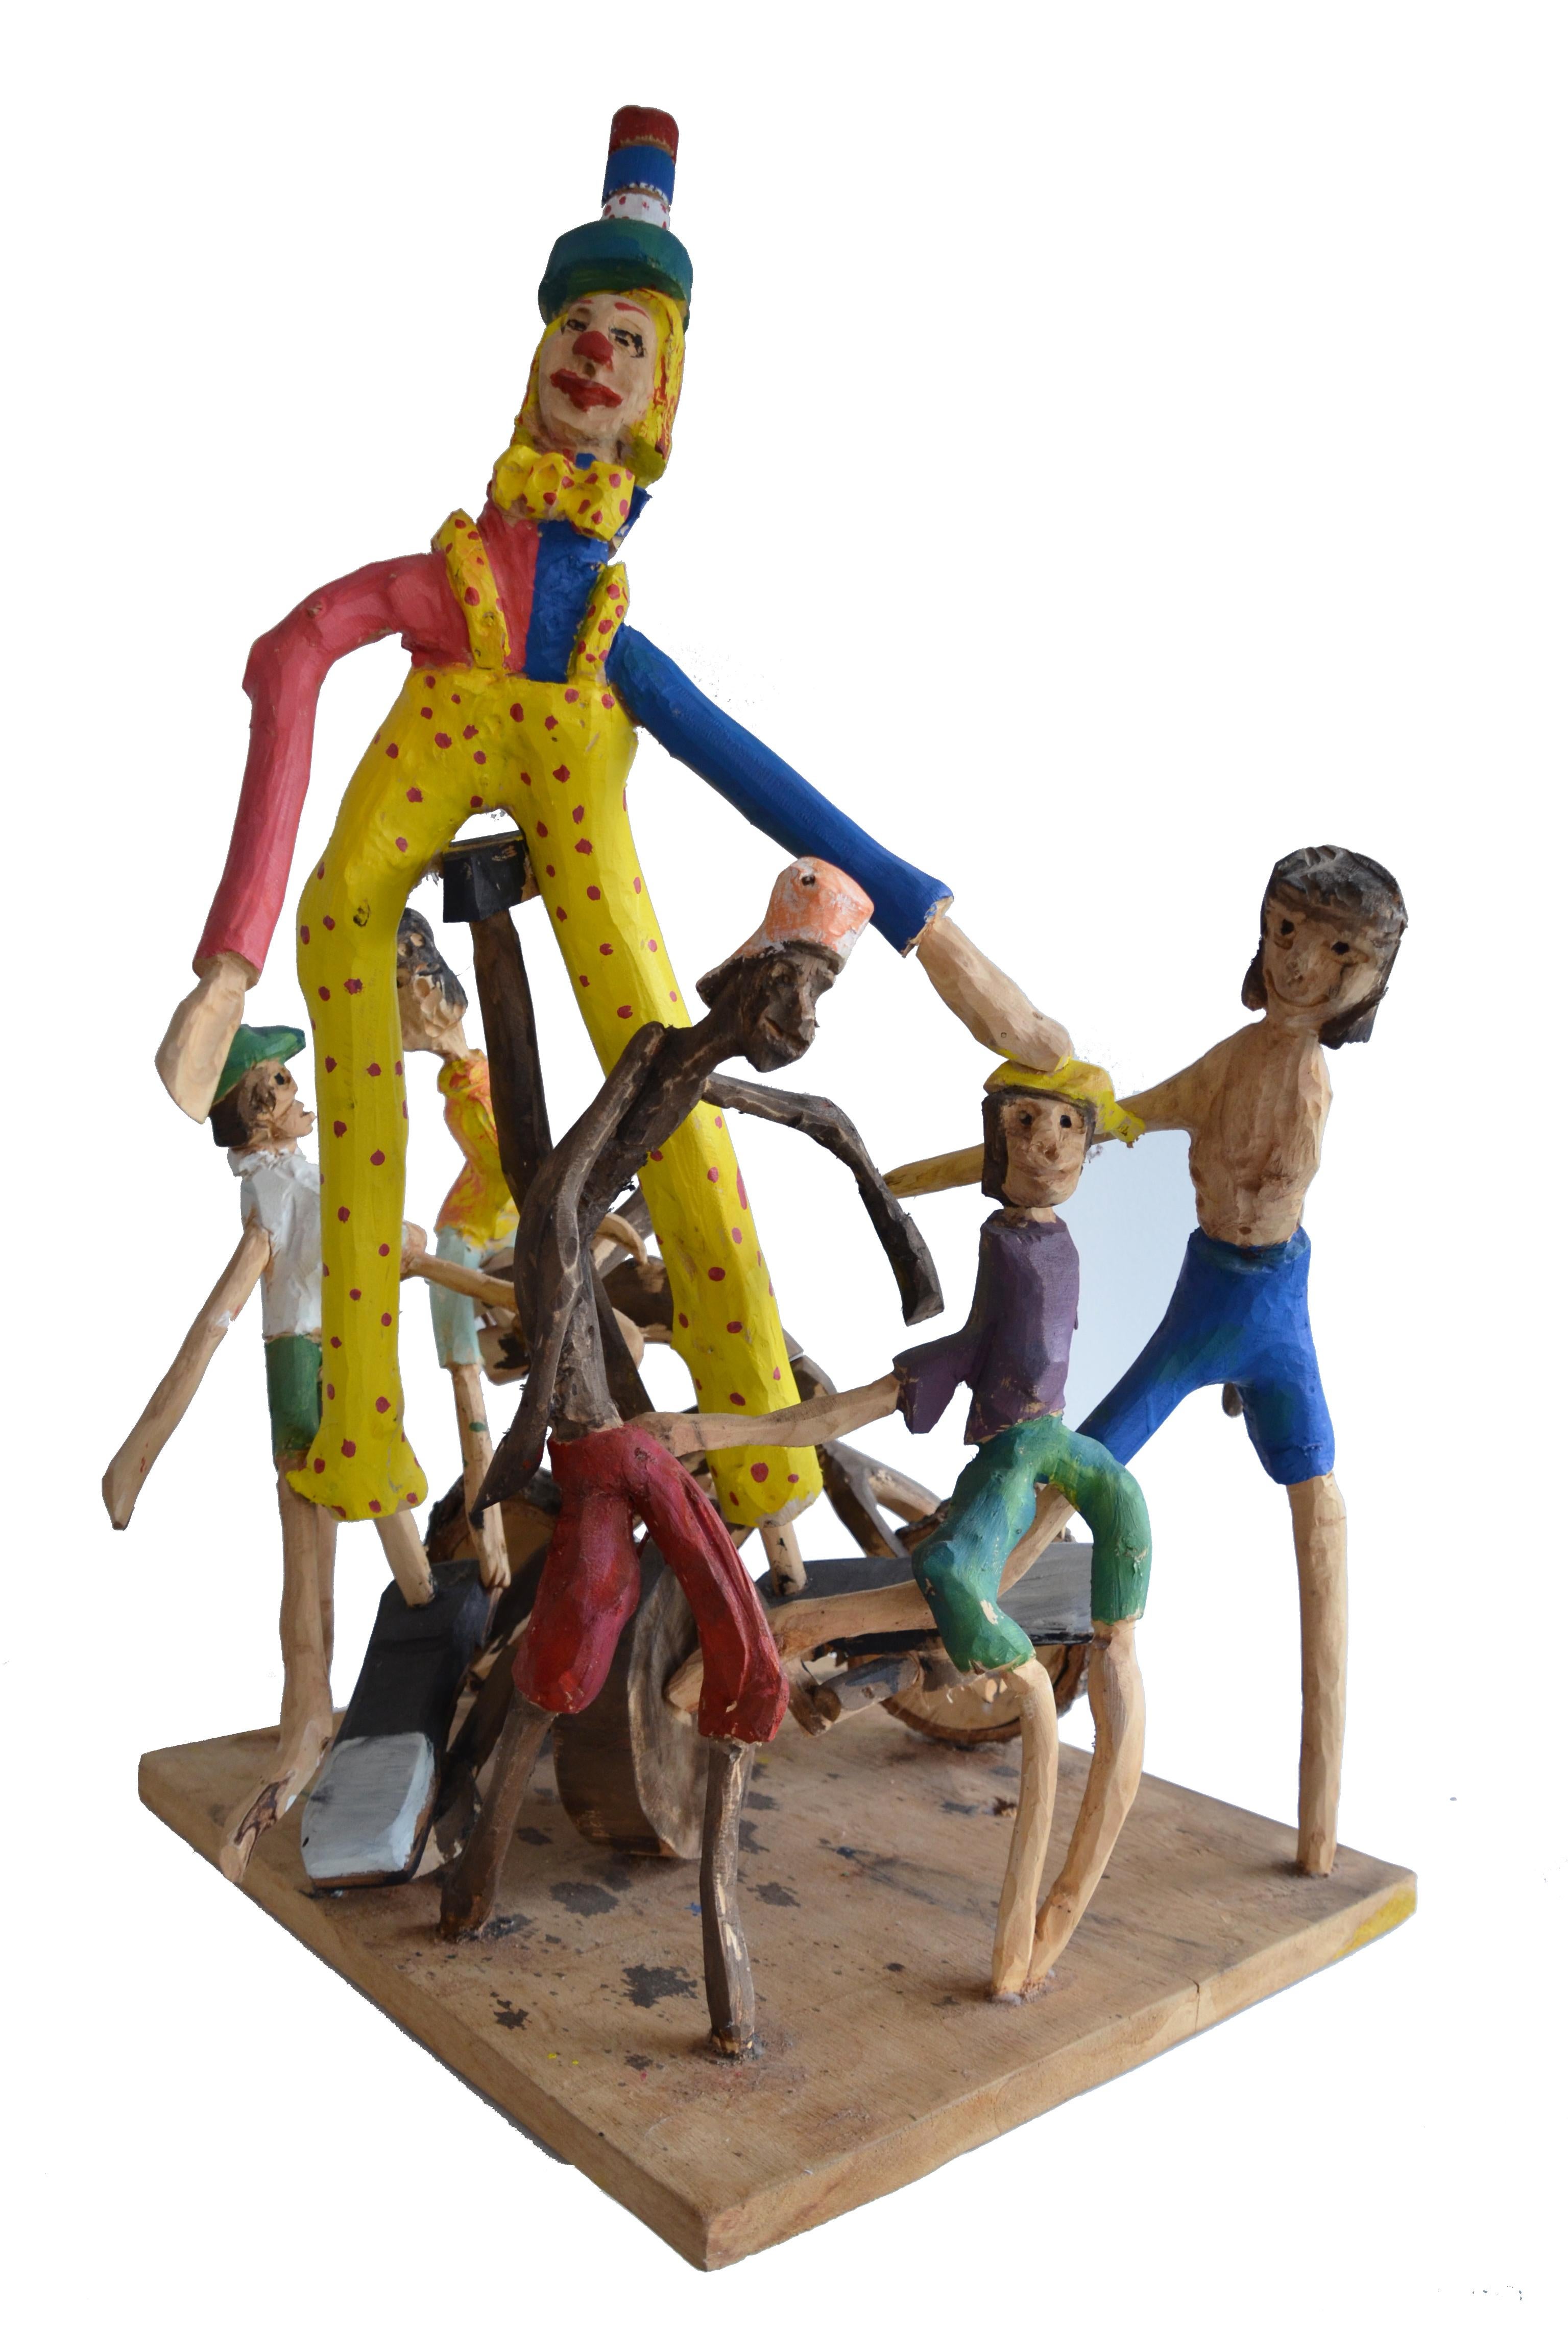 Folk Art Brazilian Hand-Carved Wood Sculpture Today We Have a Show For Sale